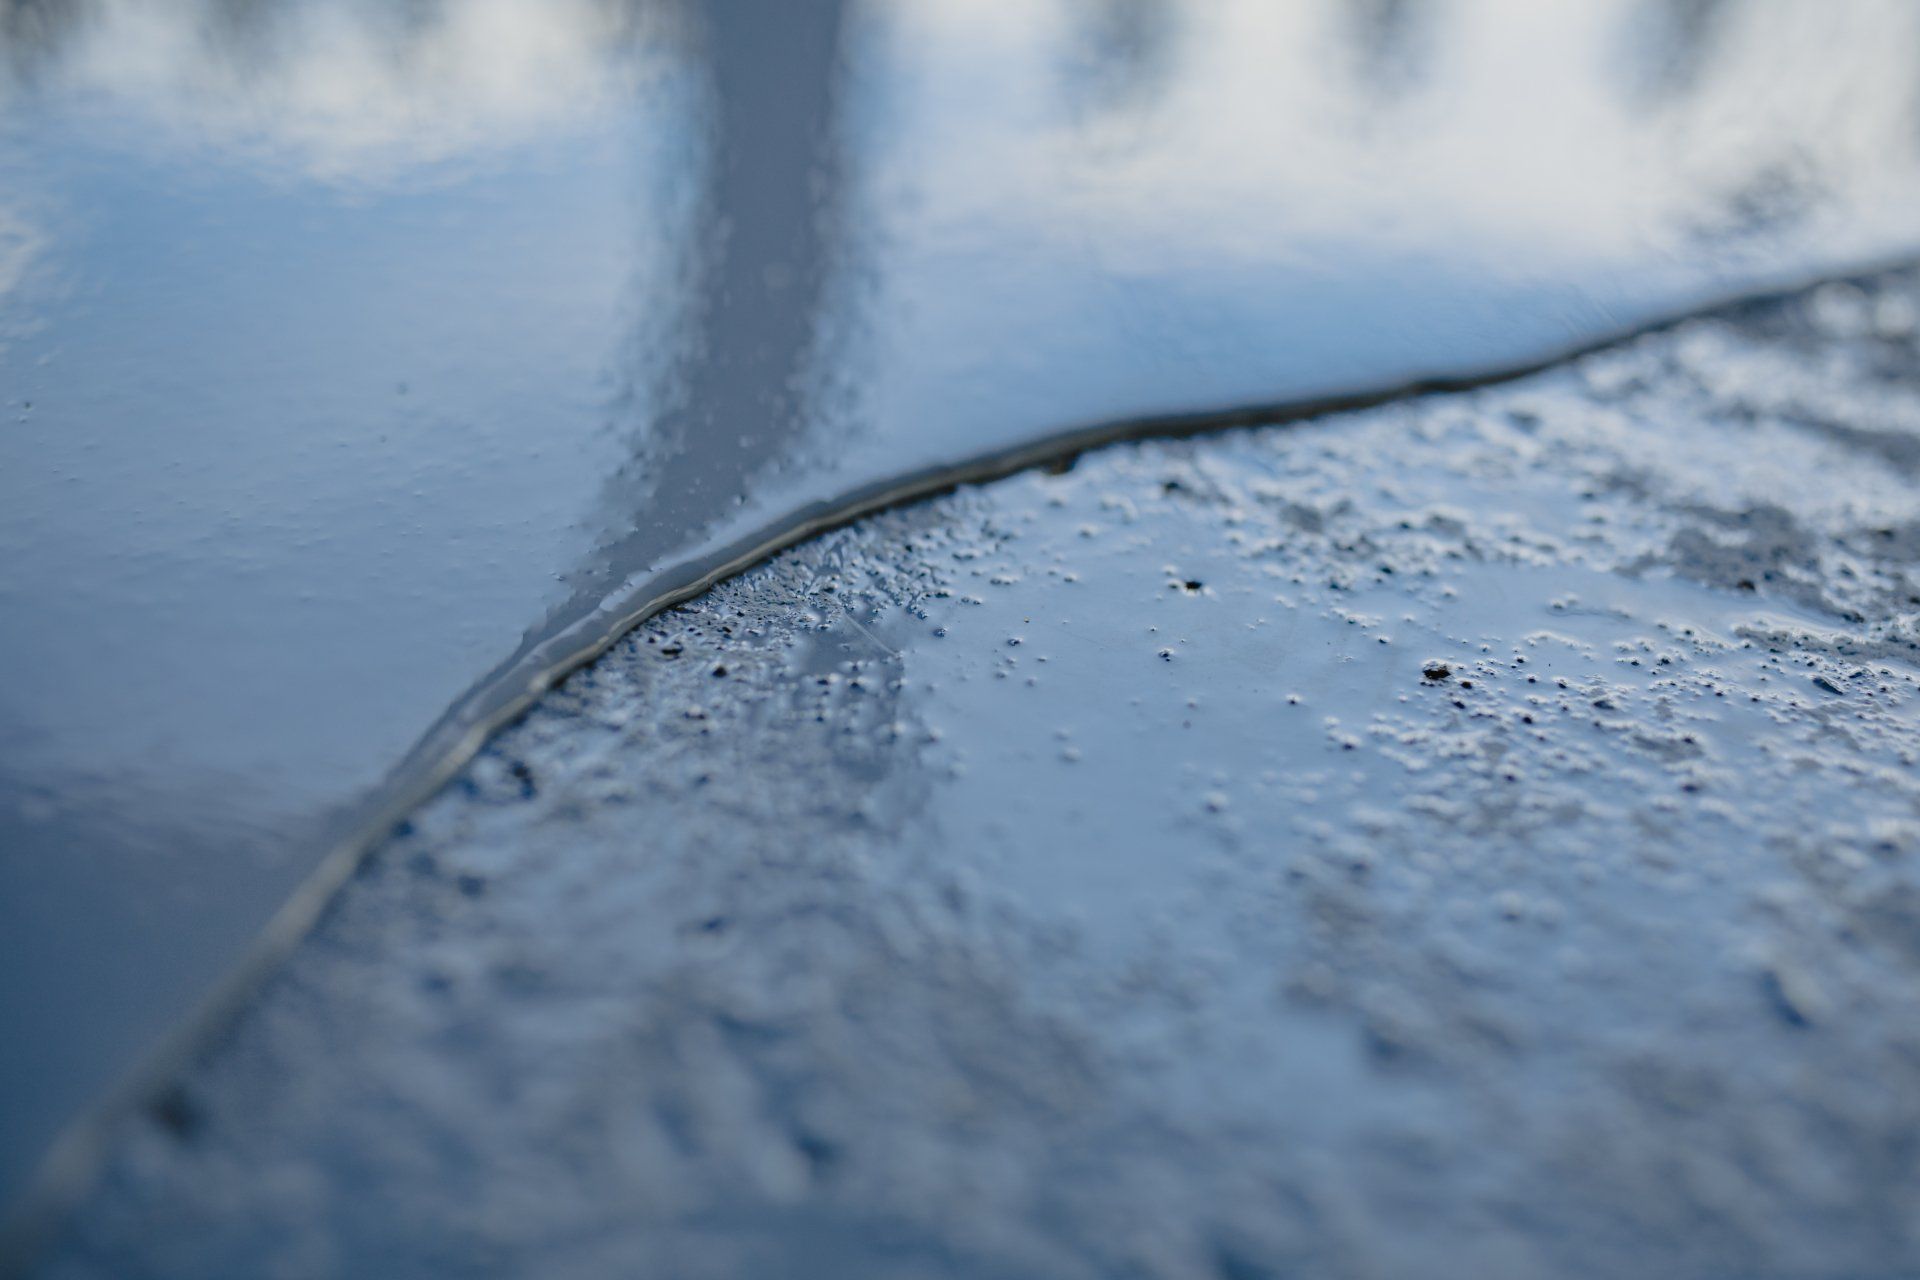 a close up of a concrete surface with a few drops of water on it .